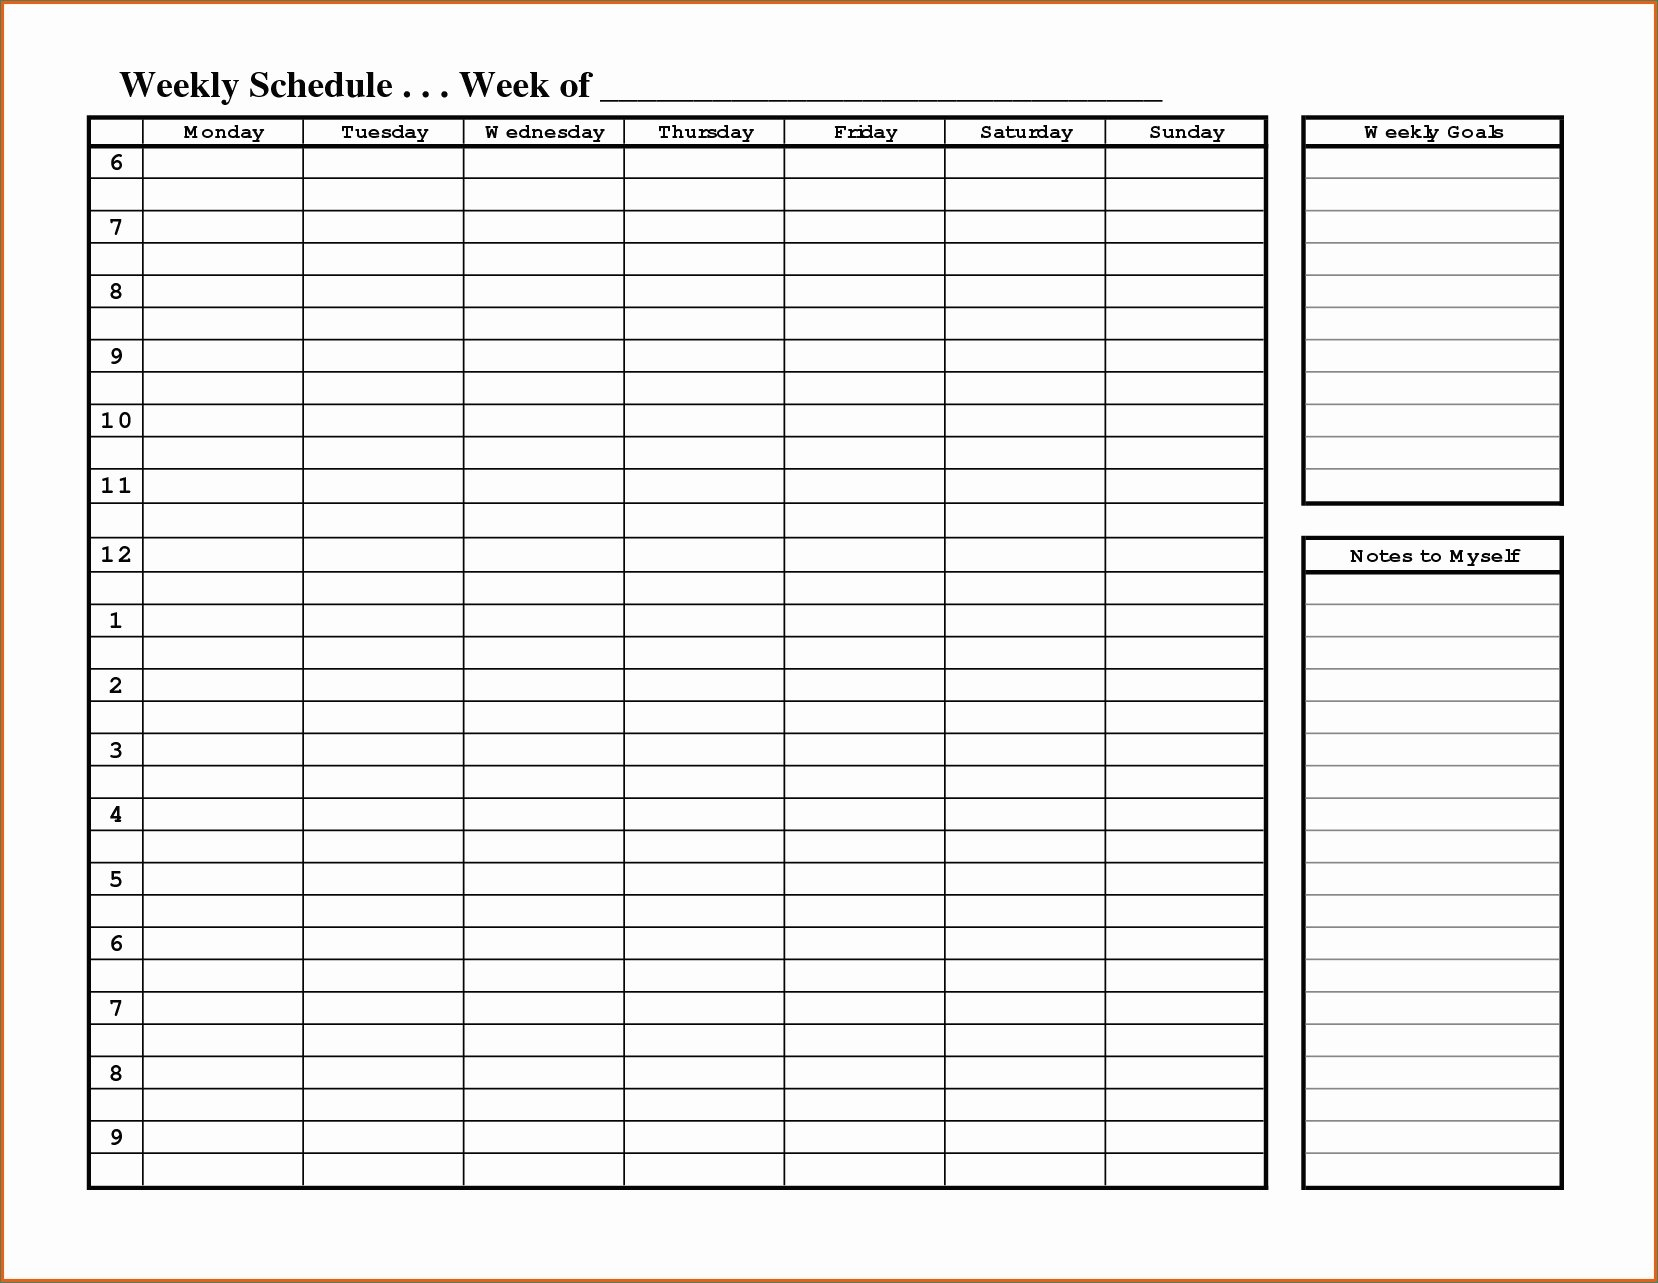 Weekday Schedule With Time Slots  Calendar Inspiration Design with regard to Weekly Calendar With Time Slots Template